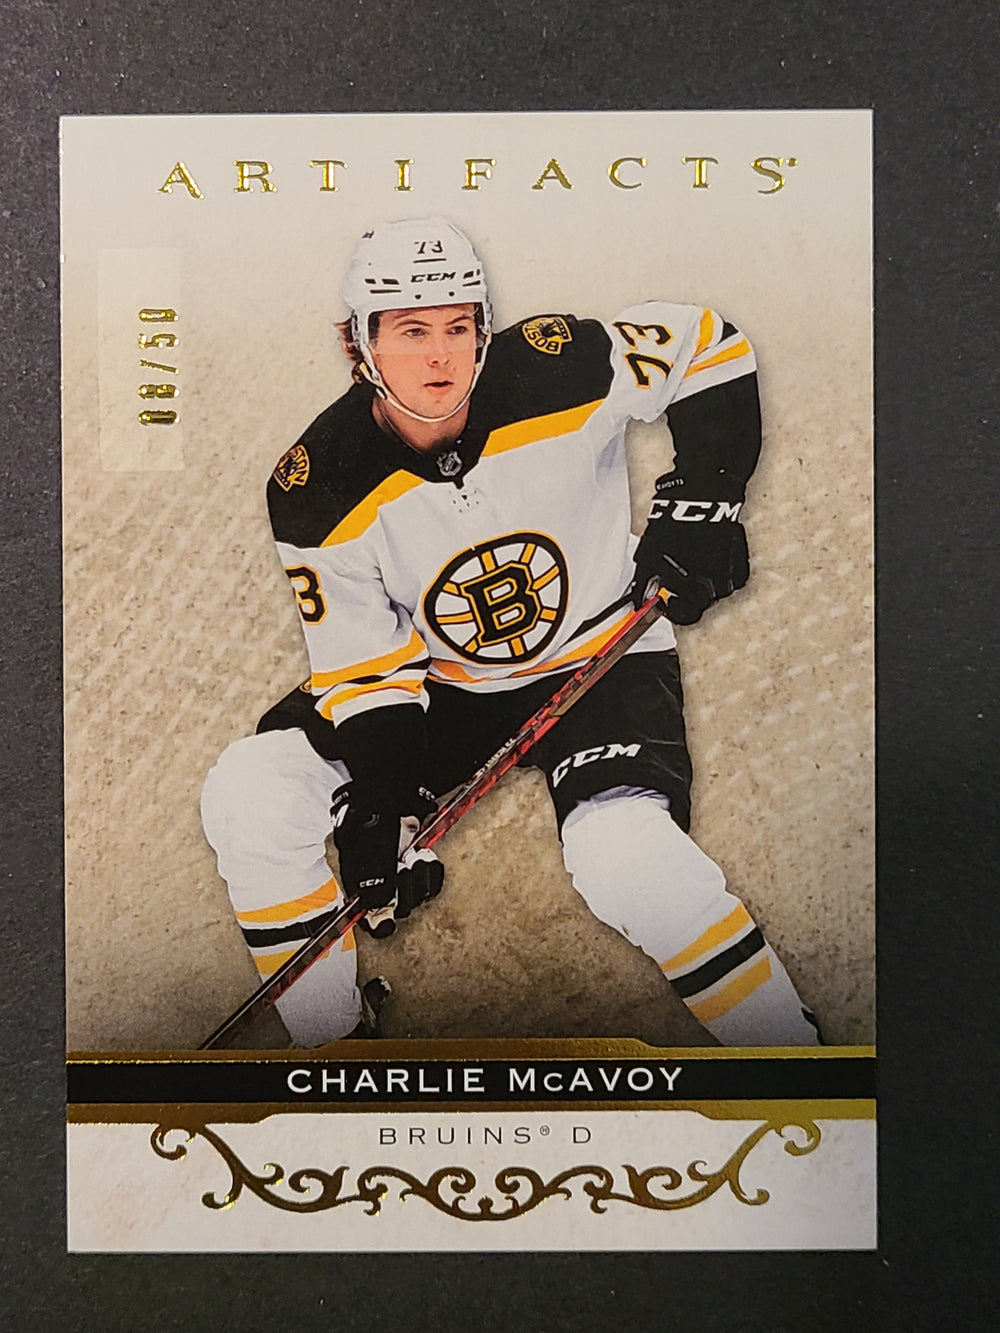 2021-22 Artifacts Yellow Parallel #28 Charlie McAvoy Boston Bruins 8/50